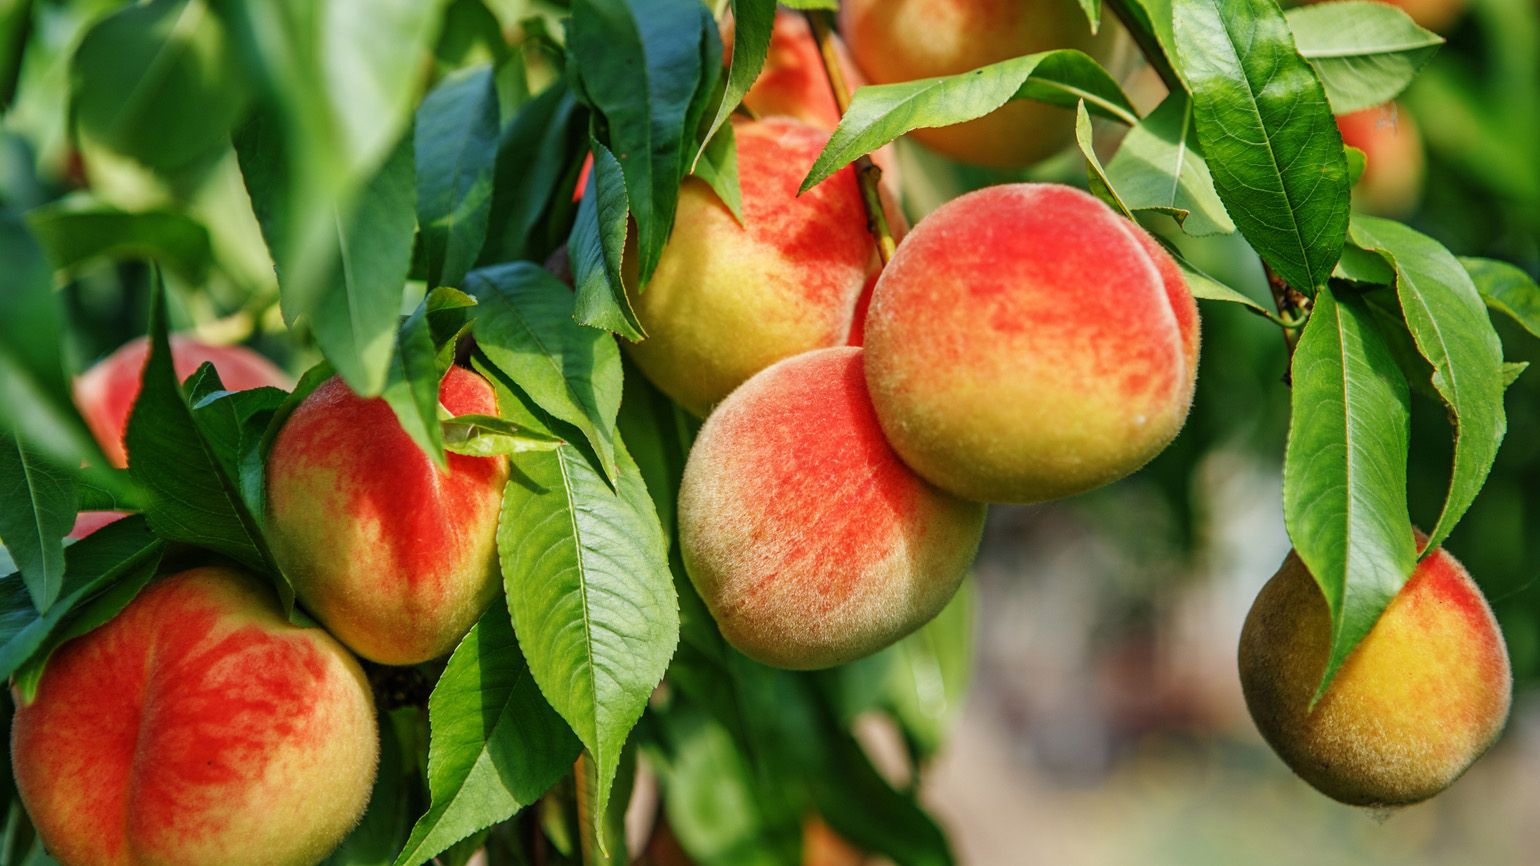 Ripe peaches on tree; Getty Images